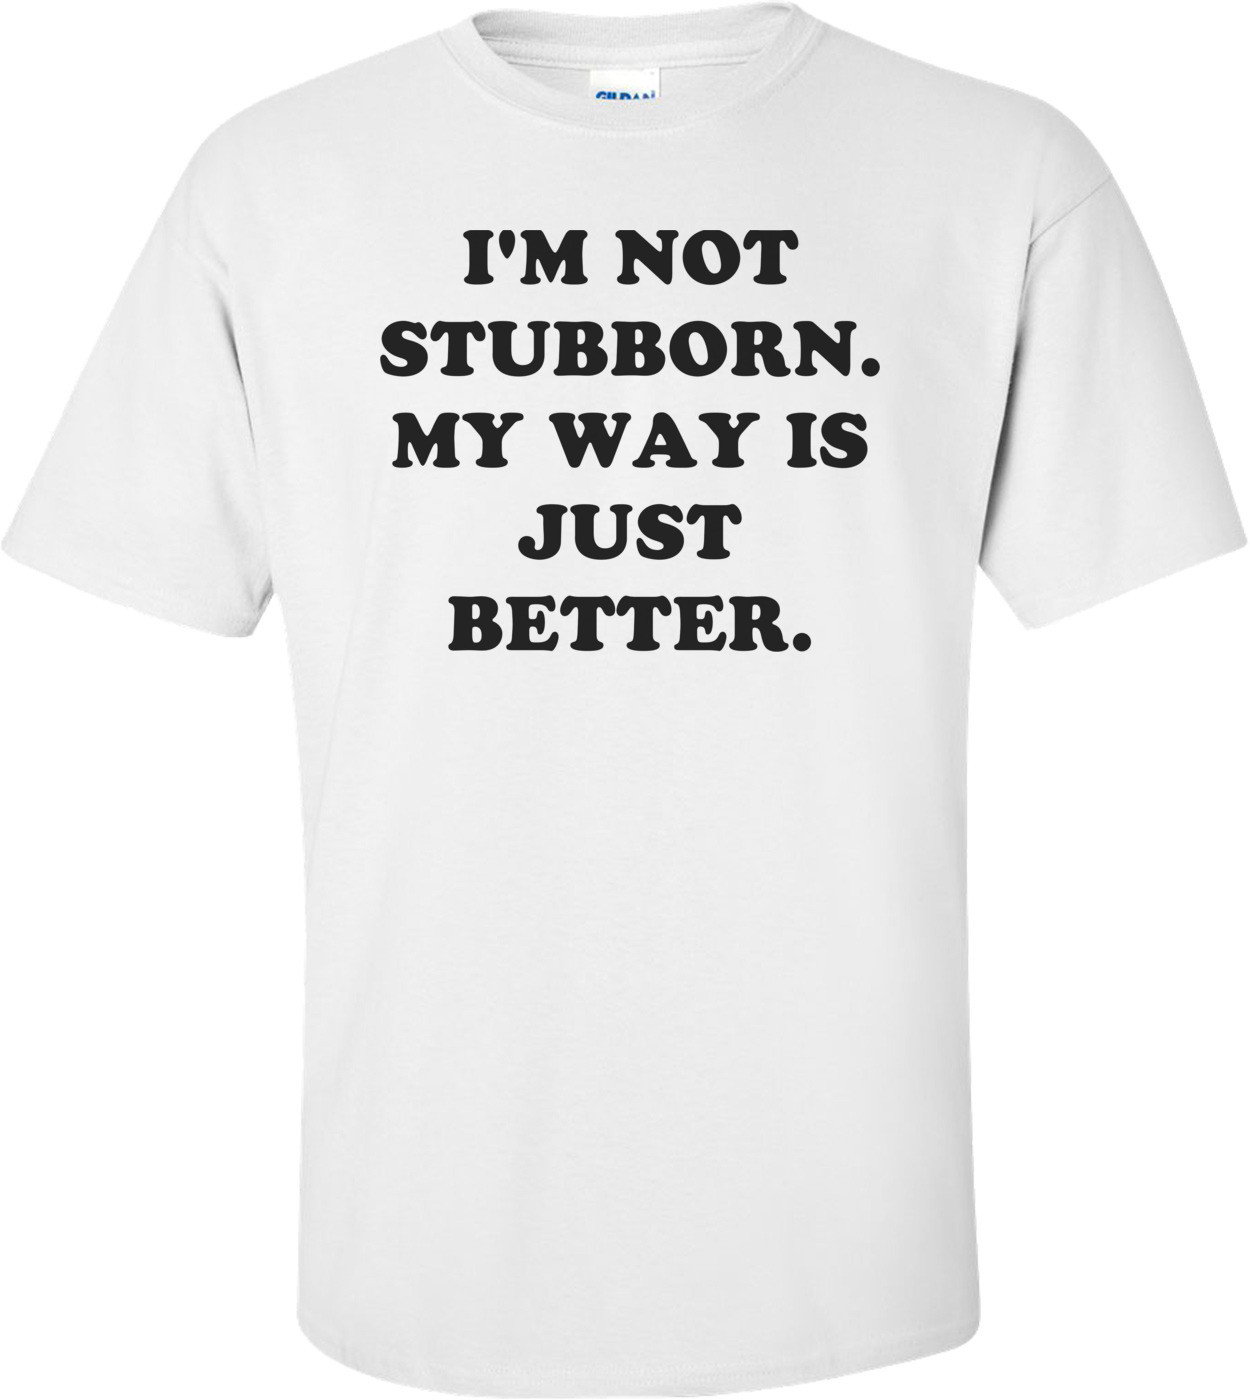 I'M NOT STUBBORN. MY WAY IS JUST BETTER. Shirt